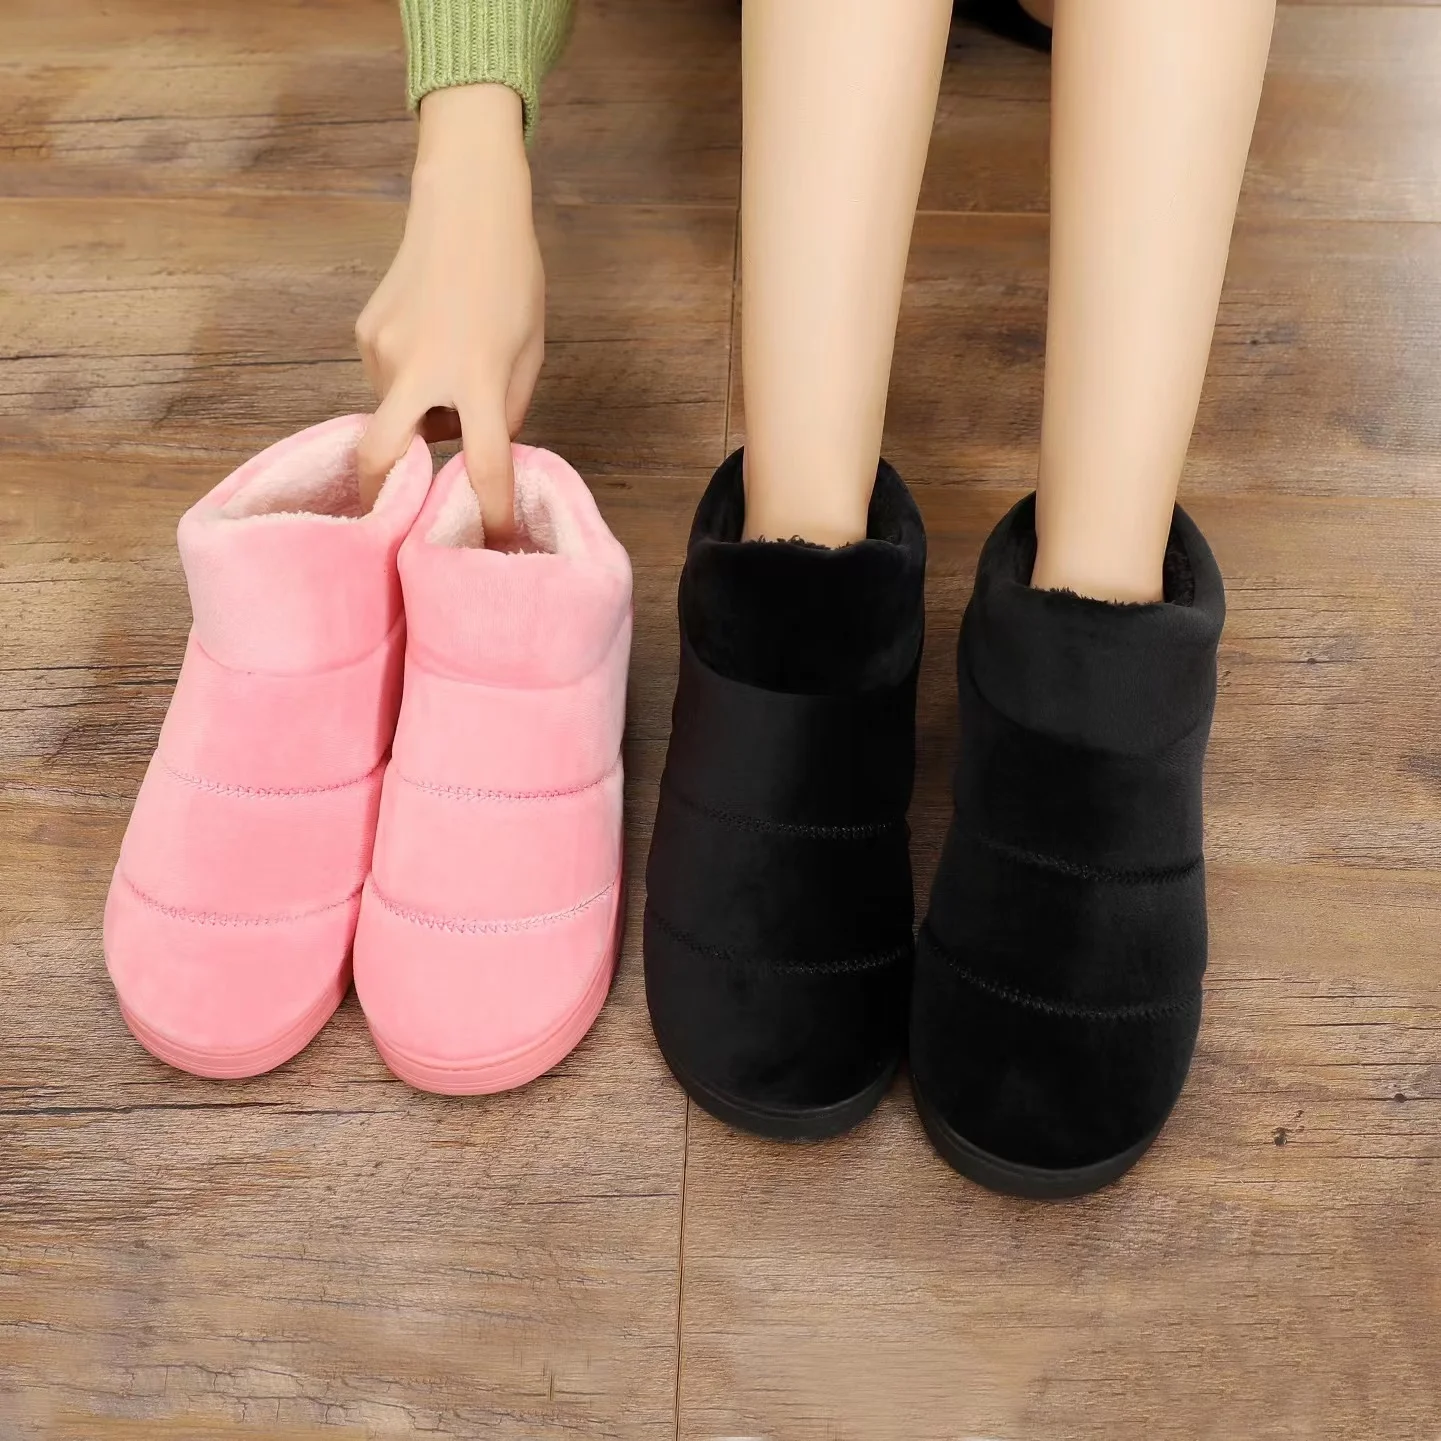 Hot Selling Indoor Women Slippers Warm Winter Rechargeable Heated Shoes Nonslip Heating Cotton Shoes